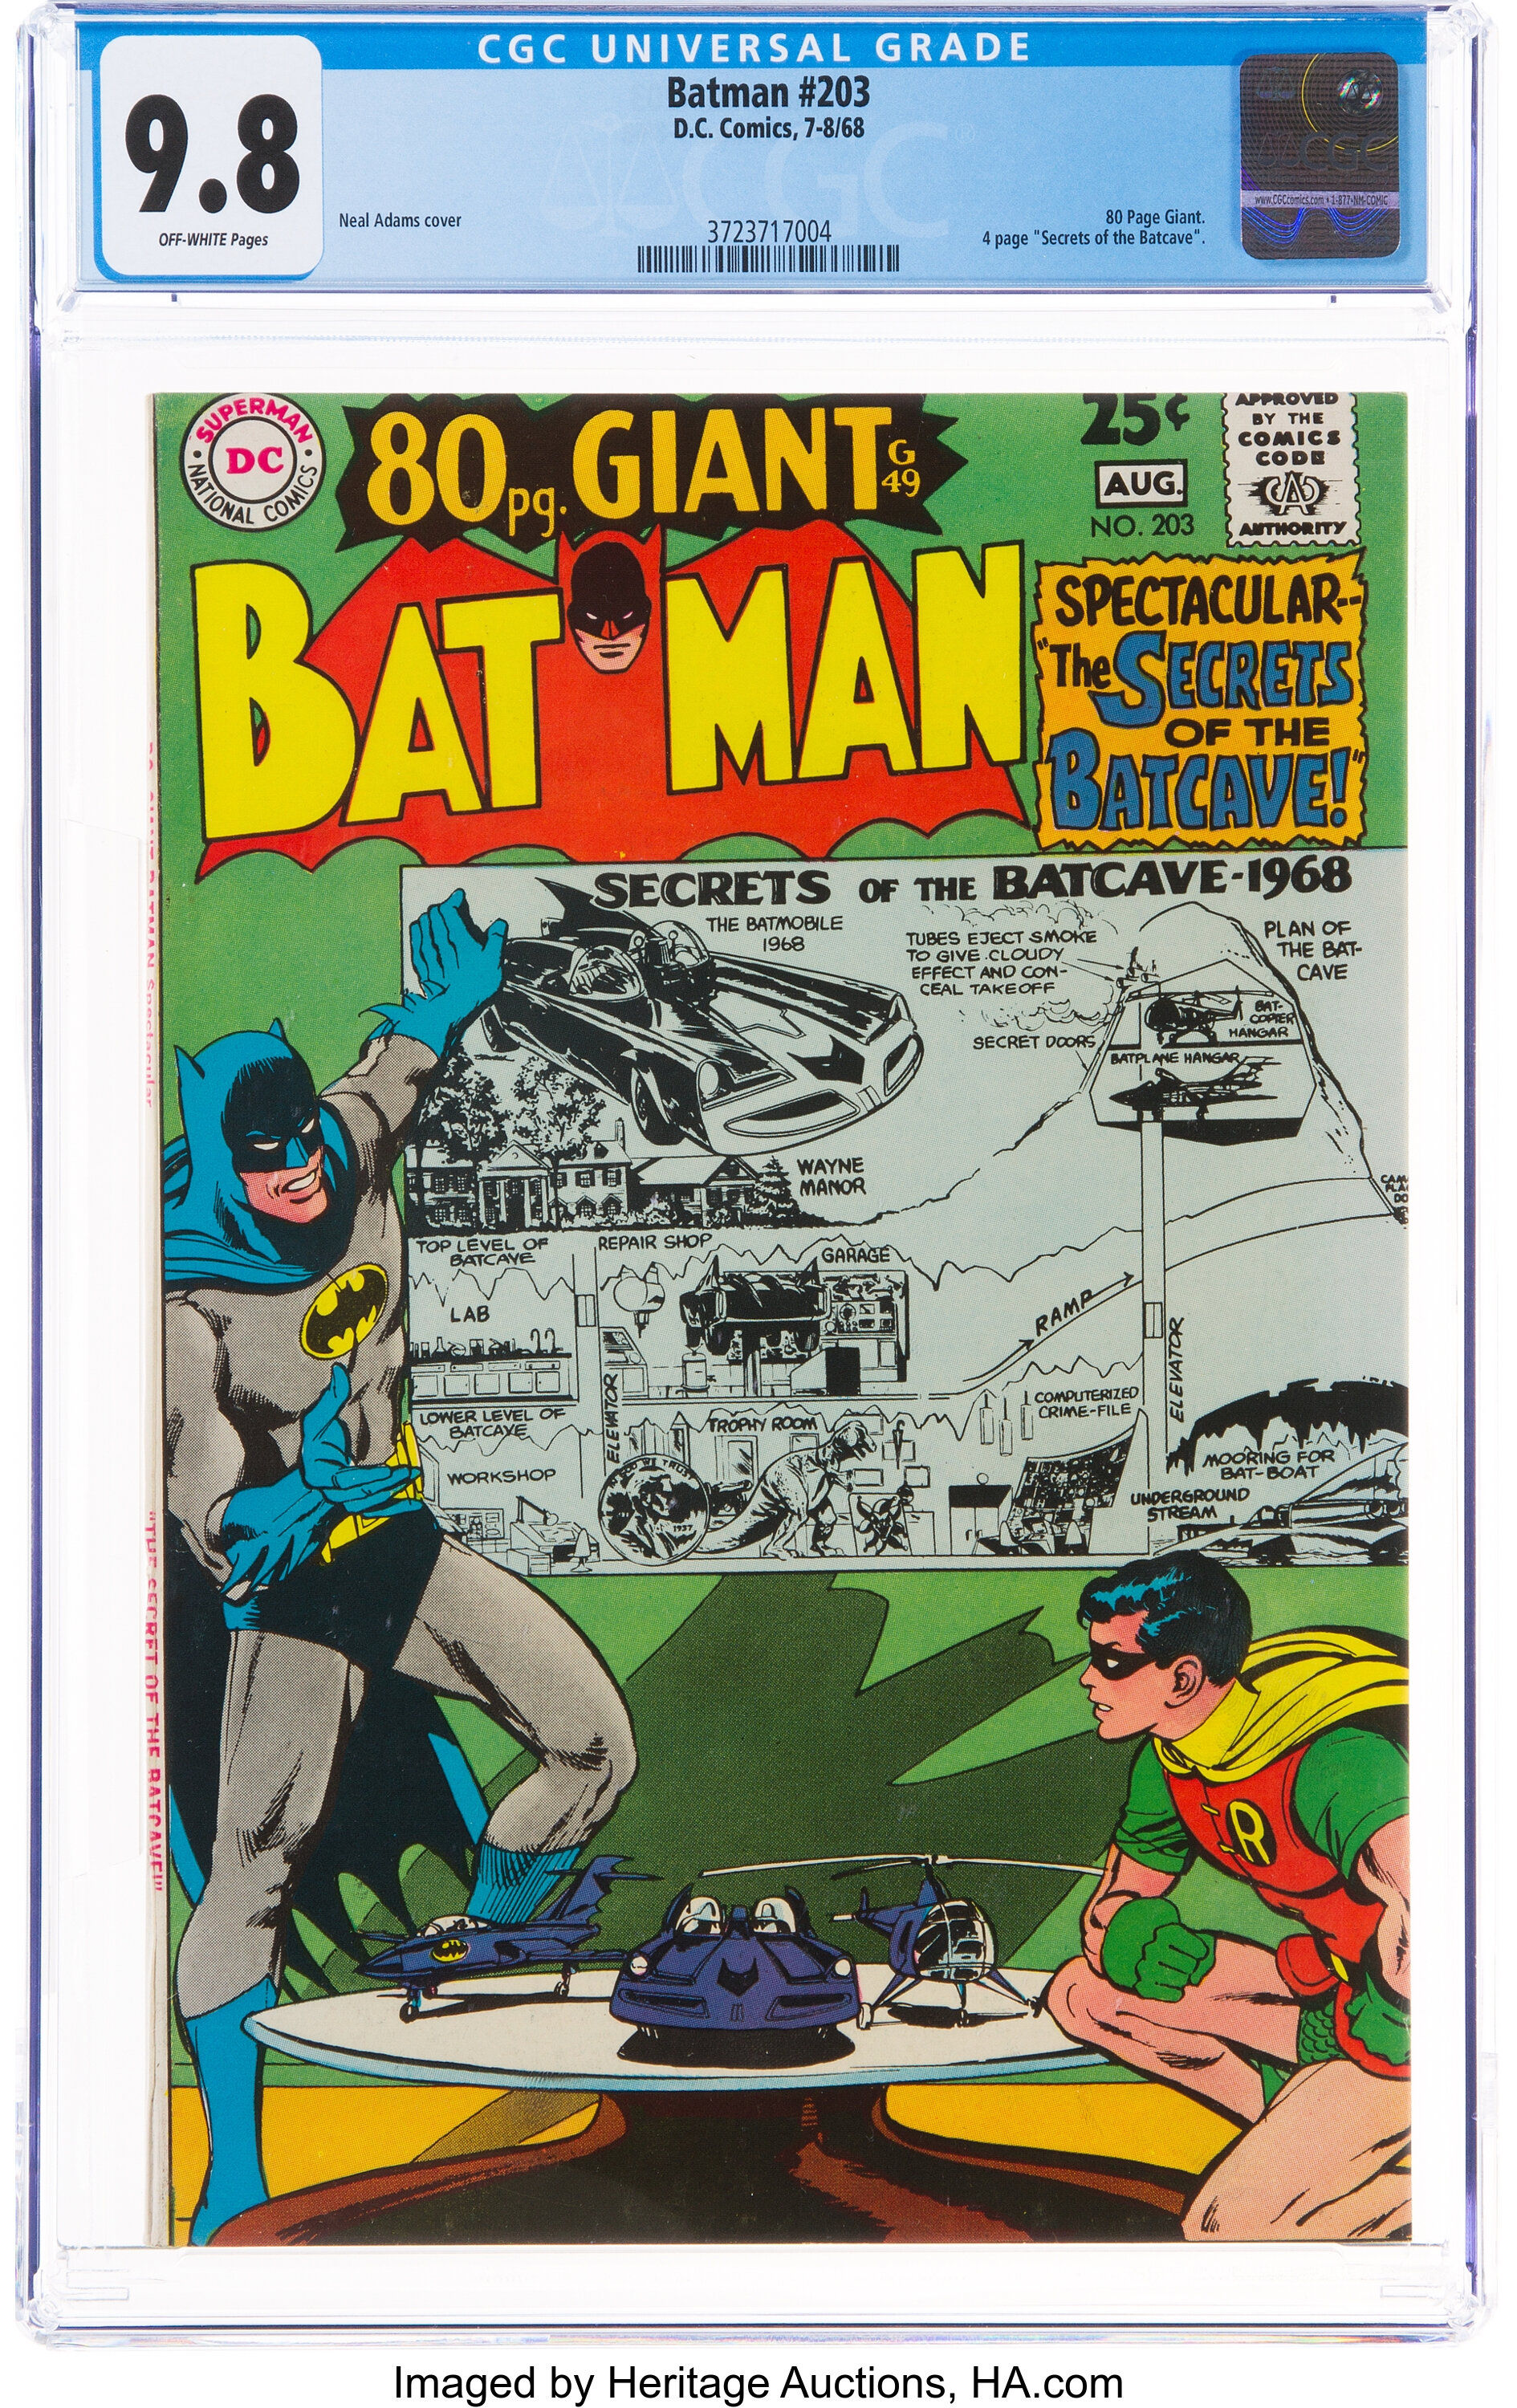 How Much Is Batman #203 Worth? Browse Comic Prices | Heritage Auctions